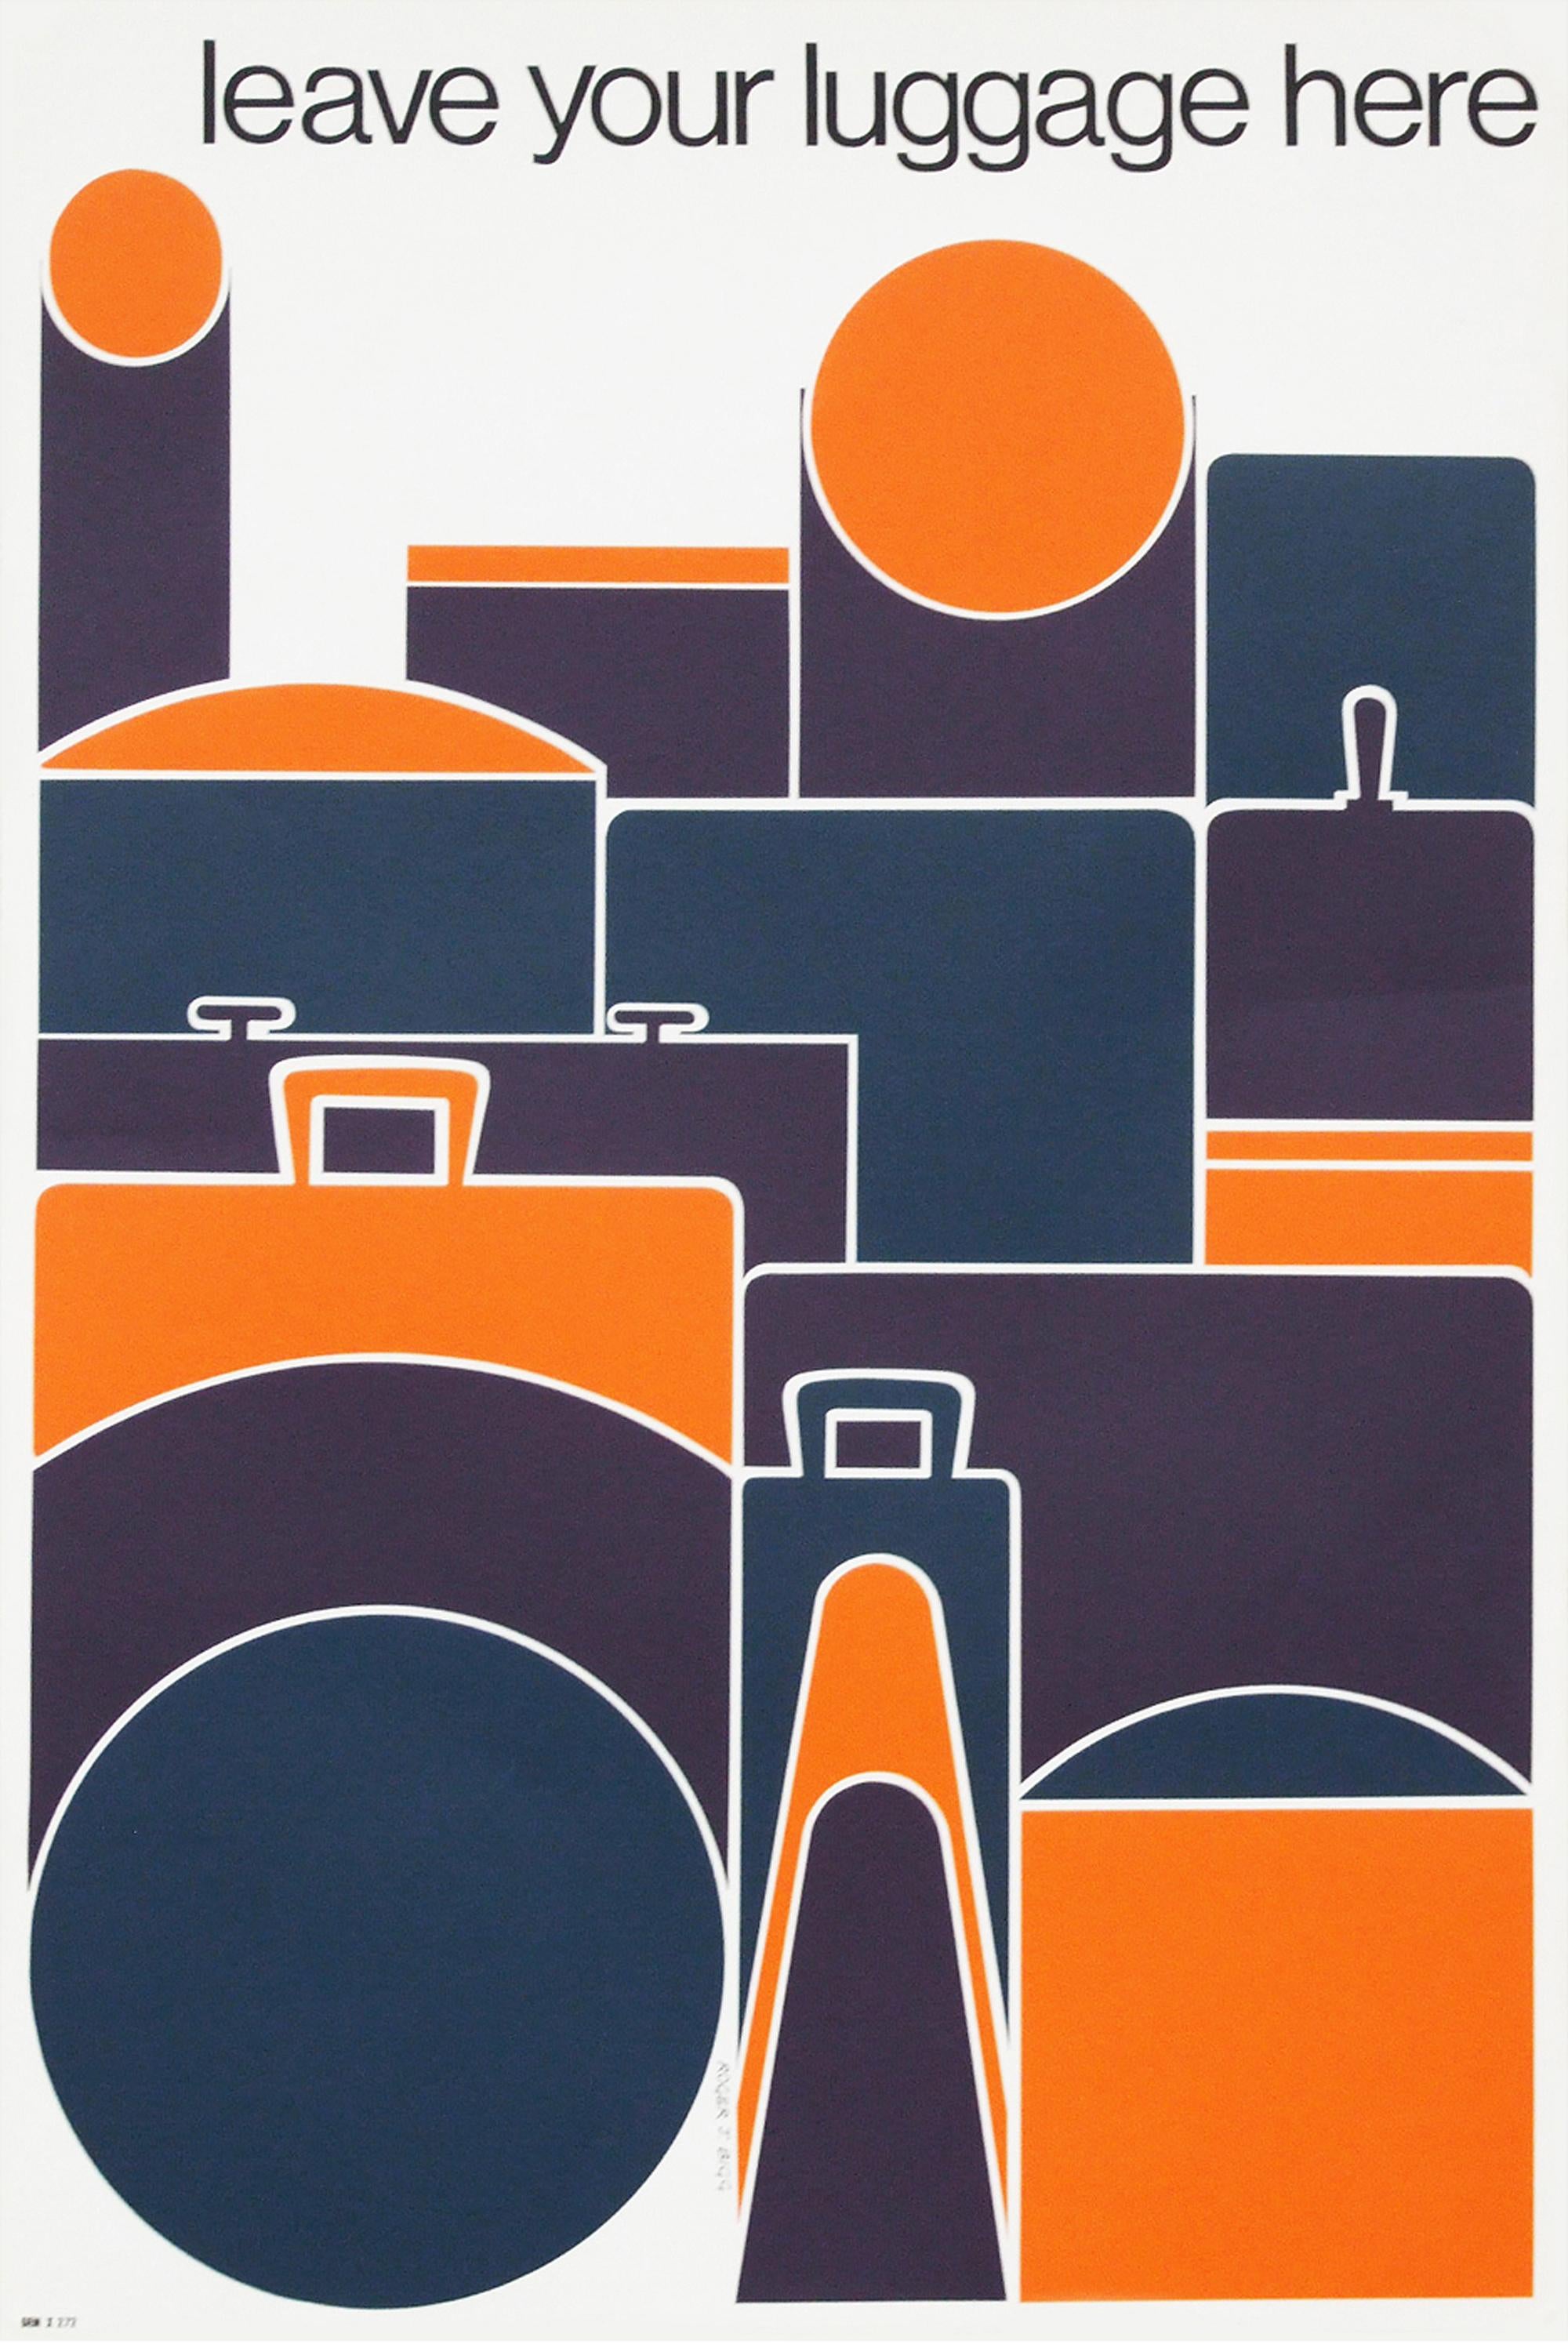 Rare original 1960s luggage information poster designed by Roger J. Bigg for British transport, UK.

First edition color offset lithograph.

Rolled.

Measures: L 76cm x W 51cm.